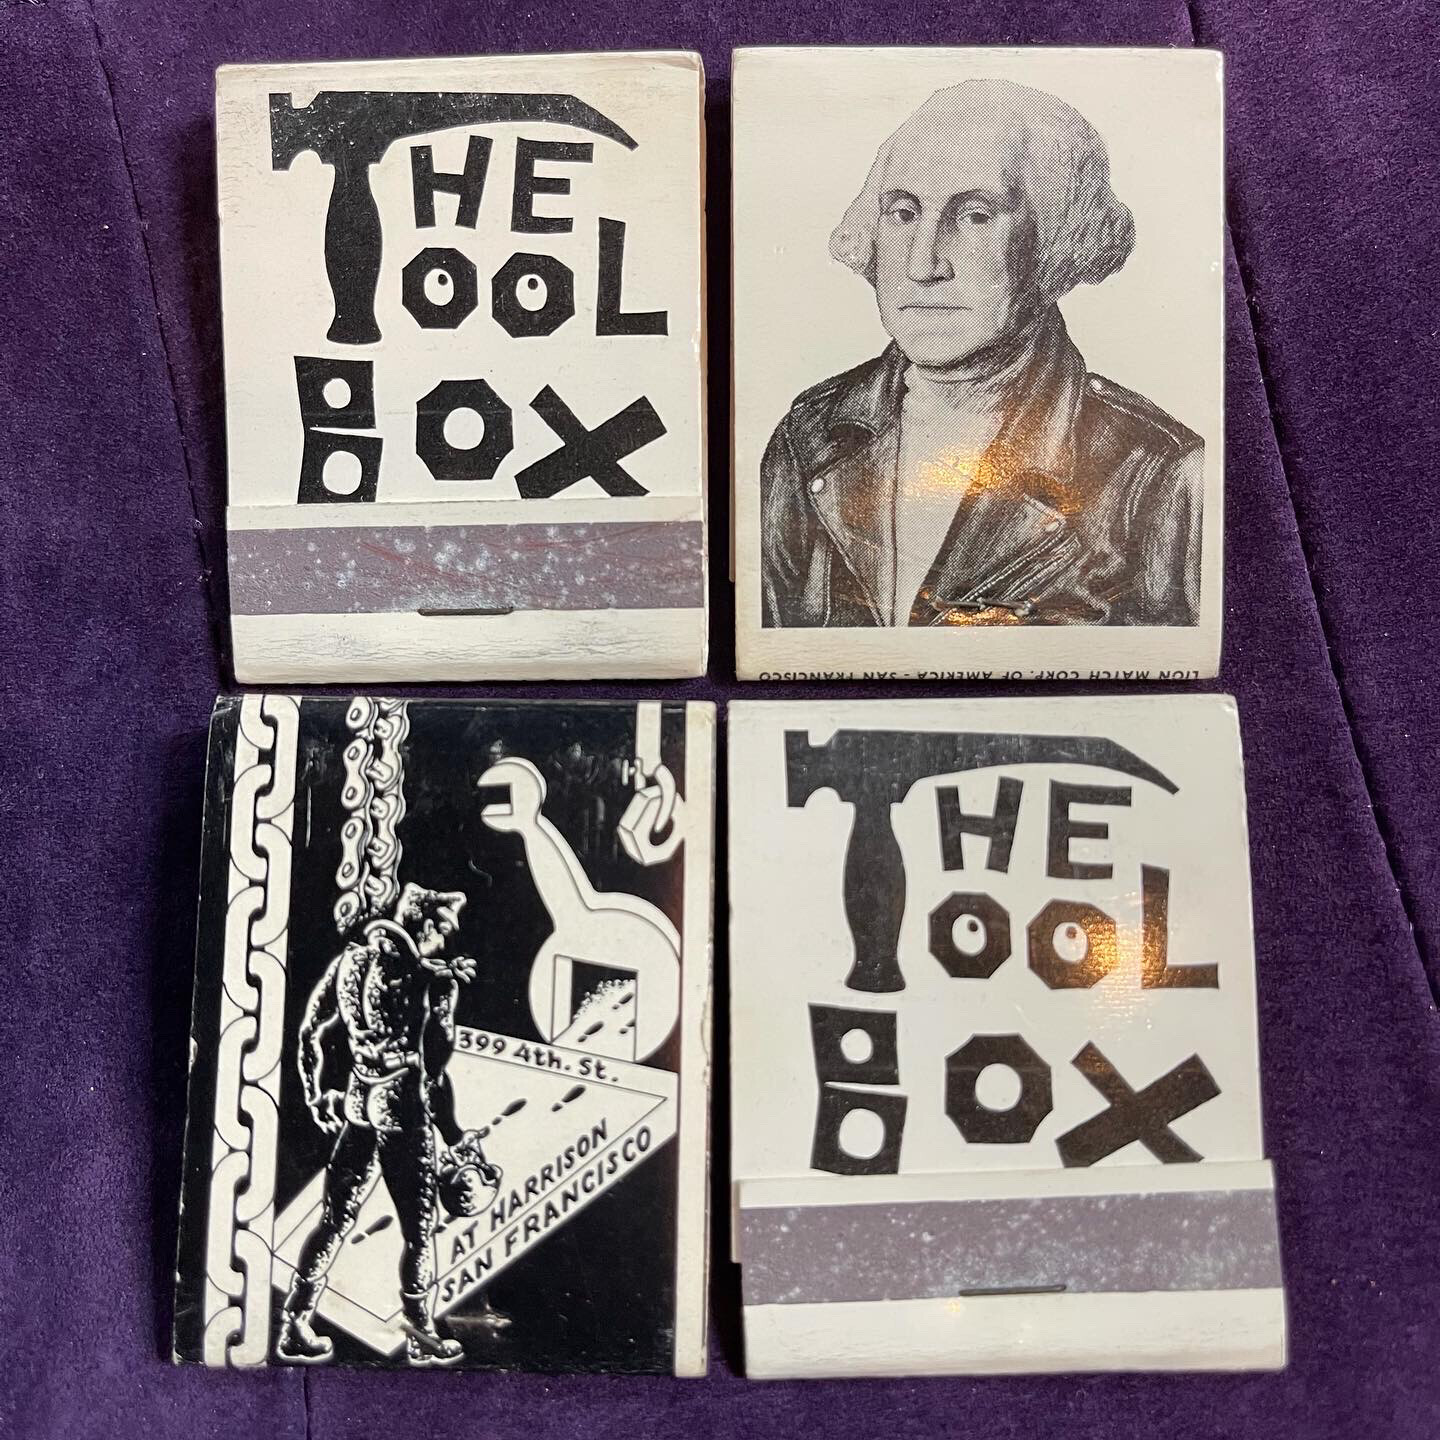 Vintage 1960s Matches From Famous Gay Bar The Tool Box!